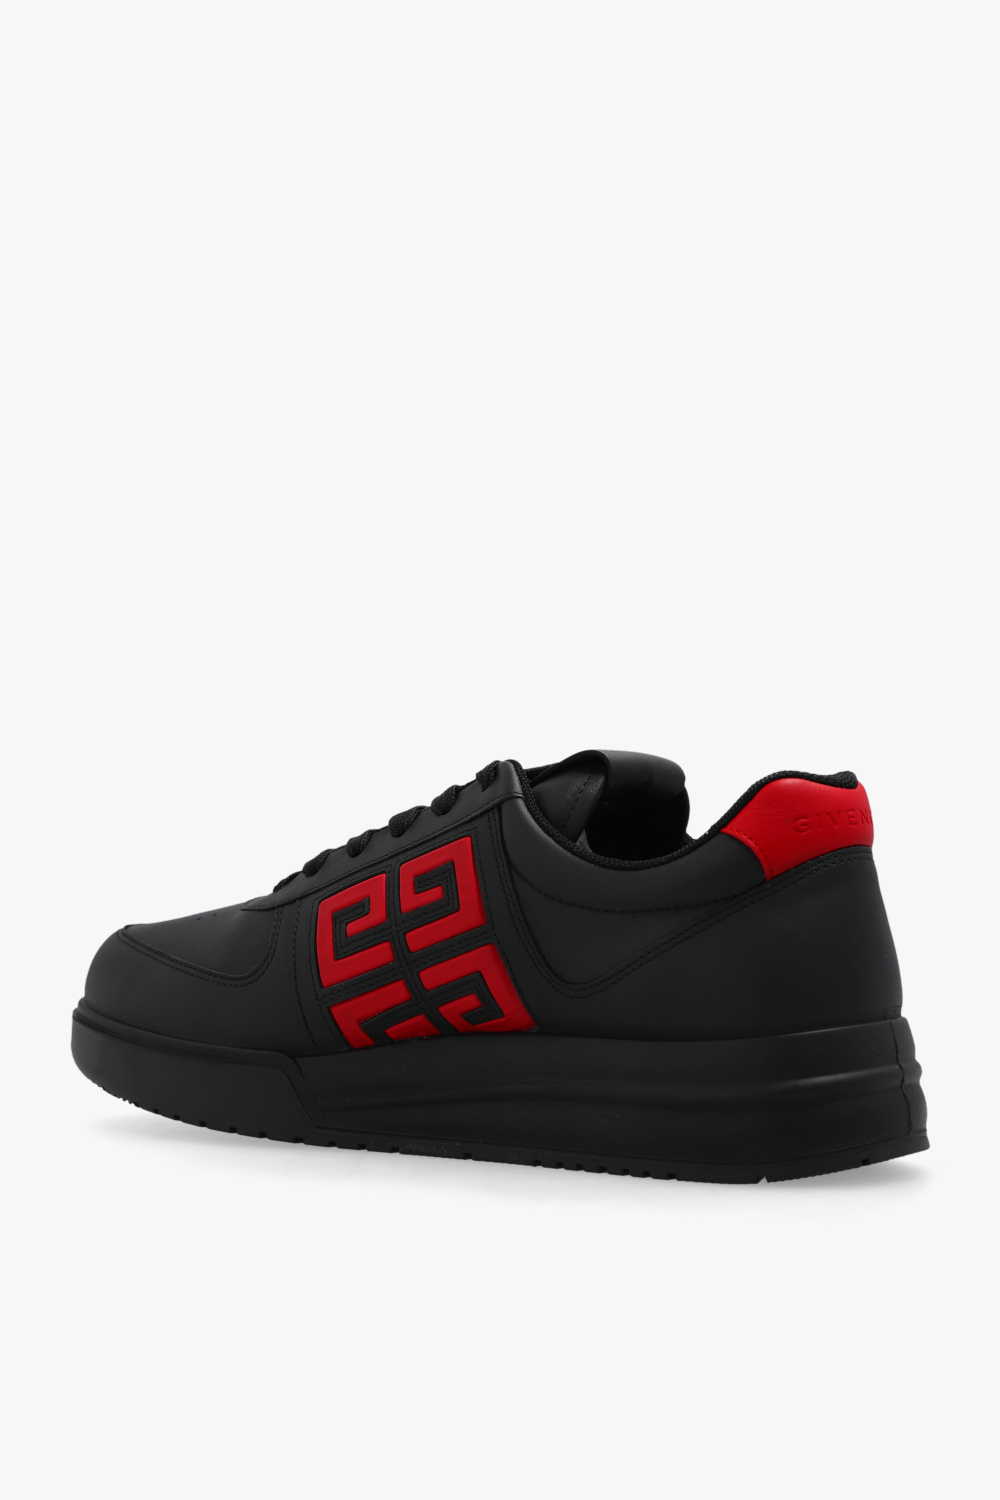 Givenchy ‘4G’ sneakers